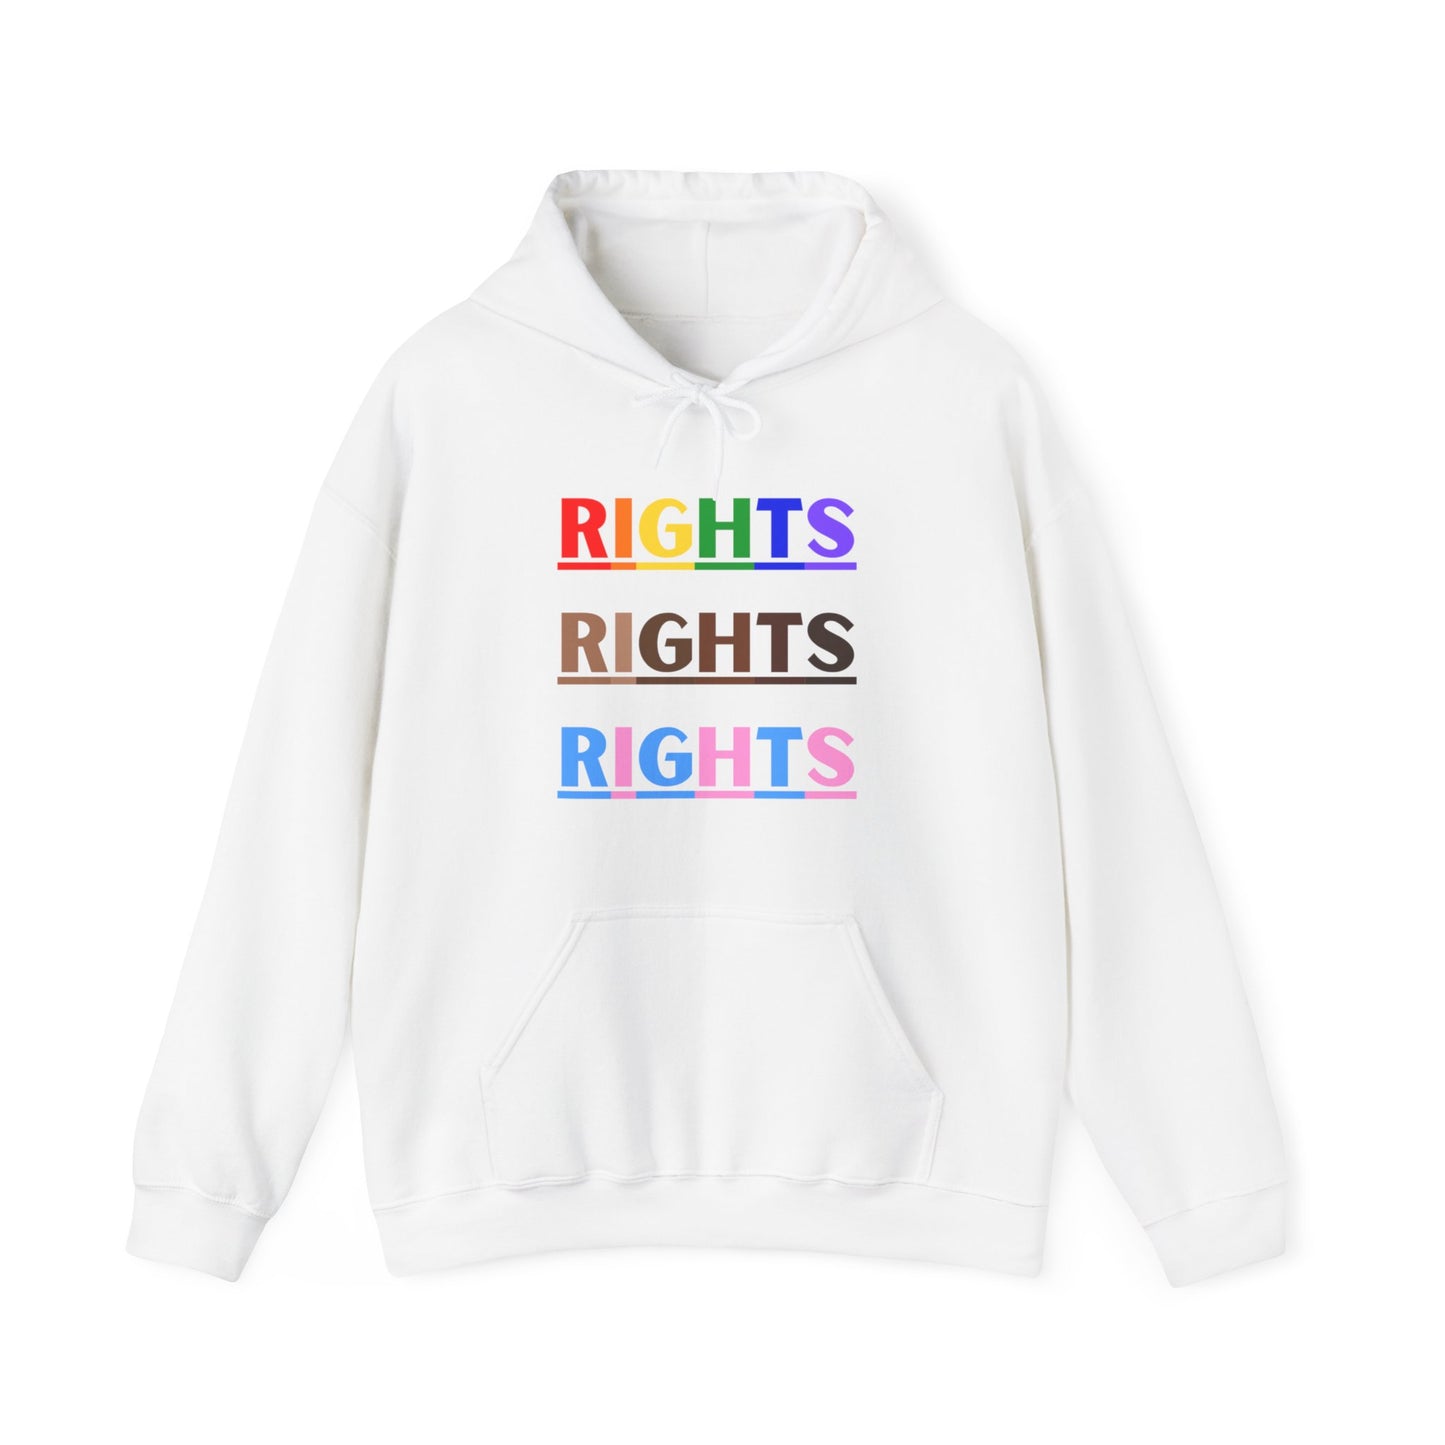 Rights, Rights, Rights Sweatshirts